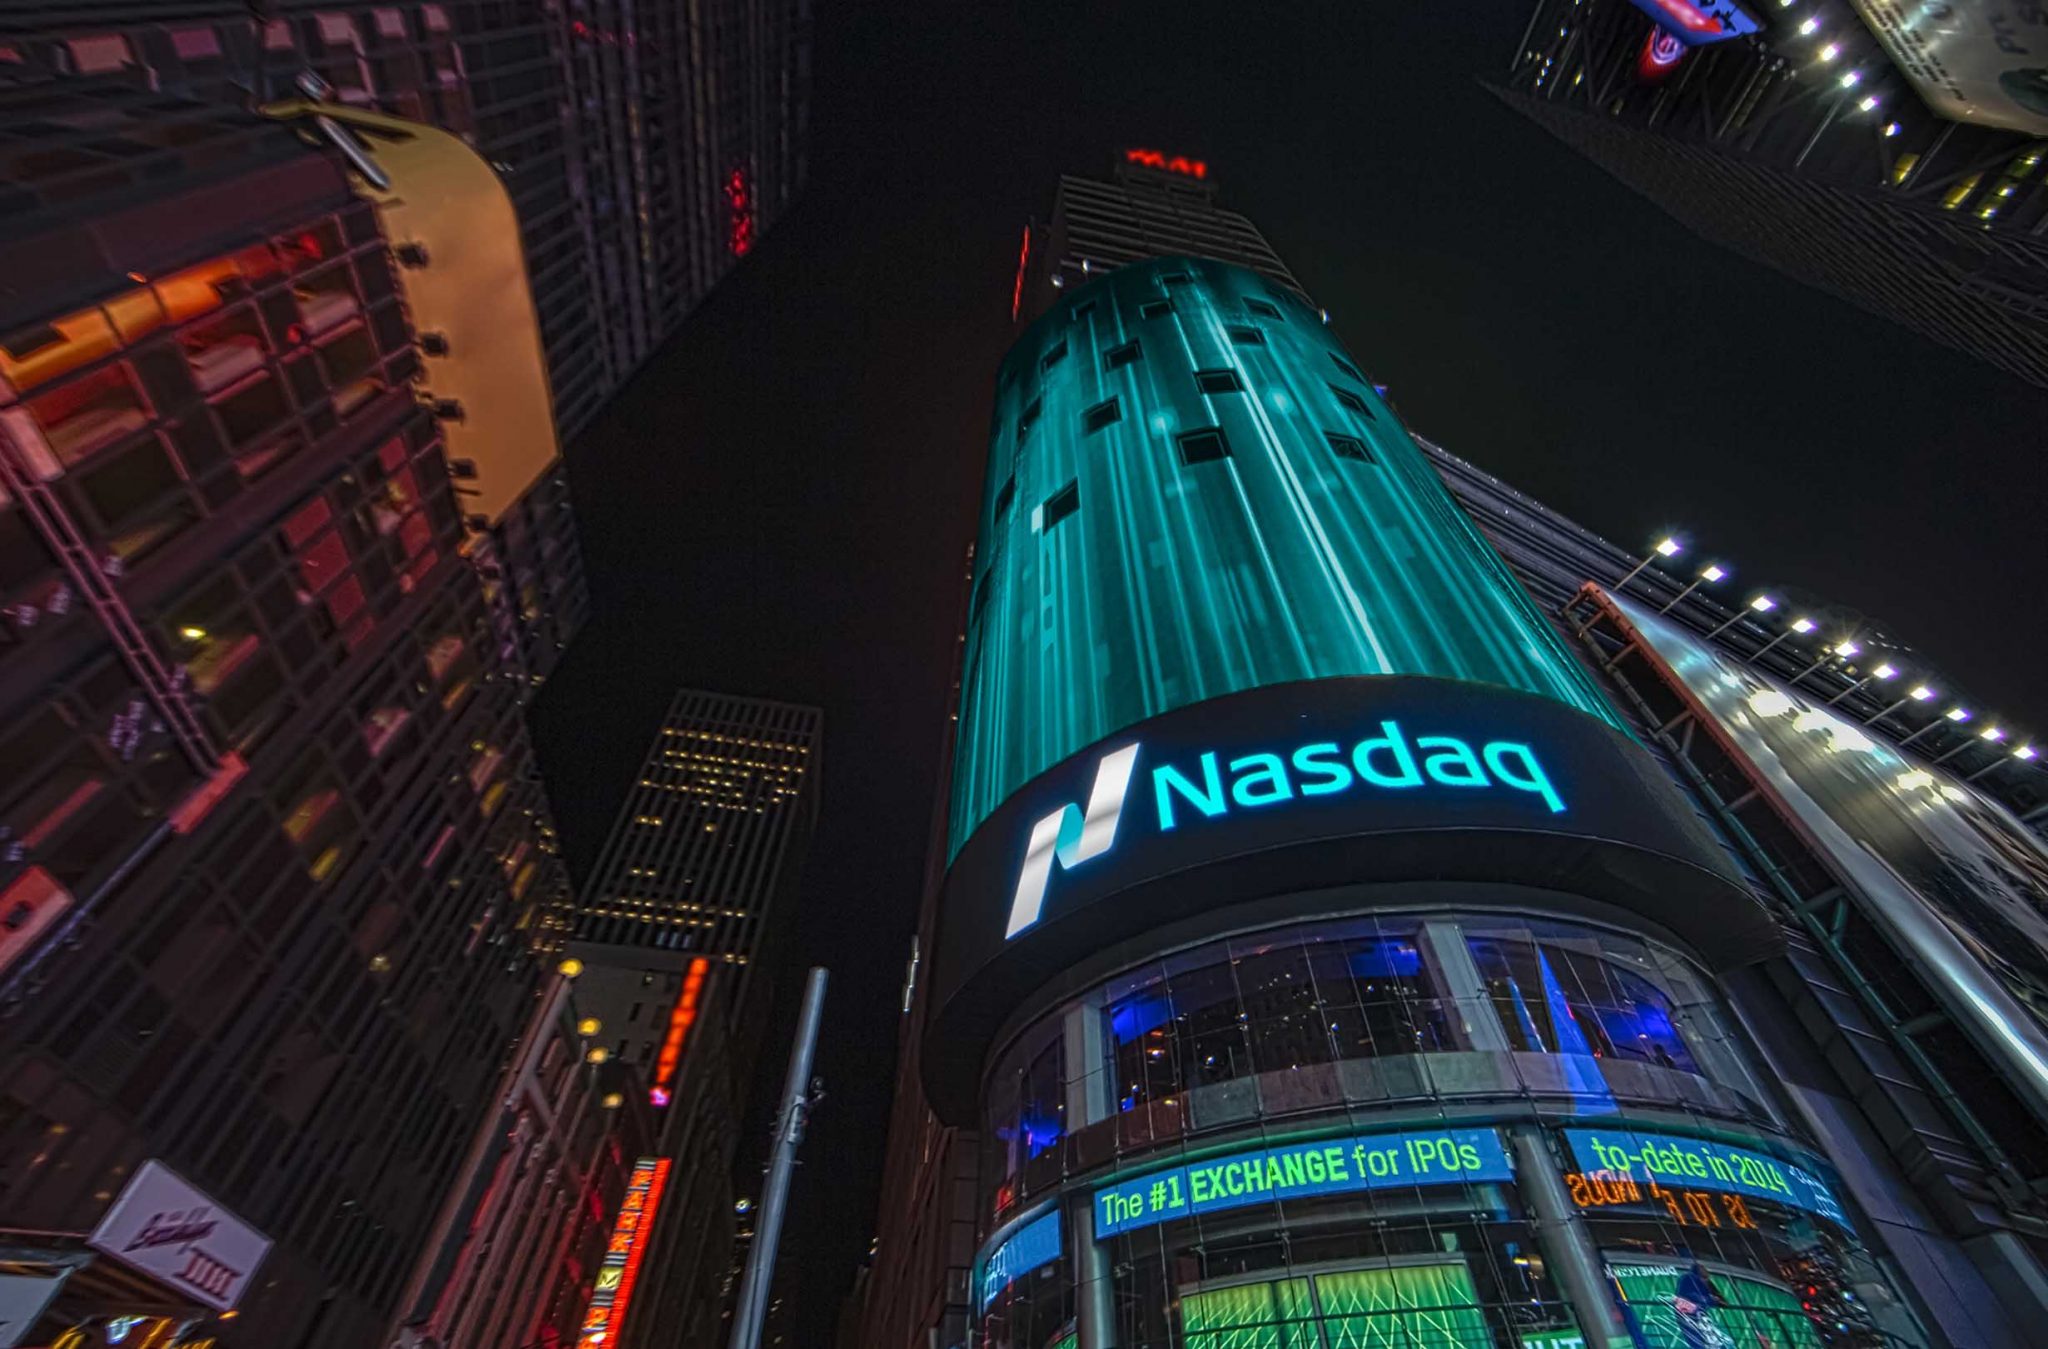 Bitcoin Surges Above $8,600 And NASDAQ Considers Launching BTC Futures